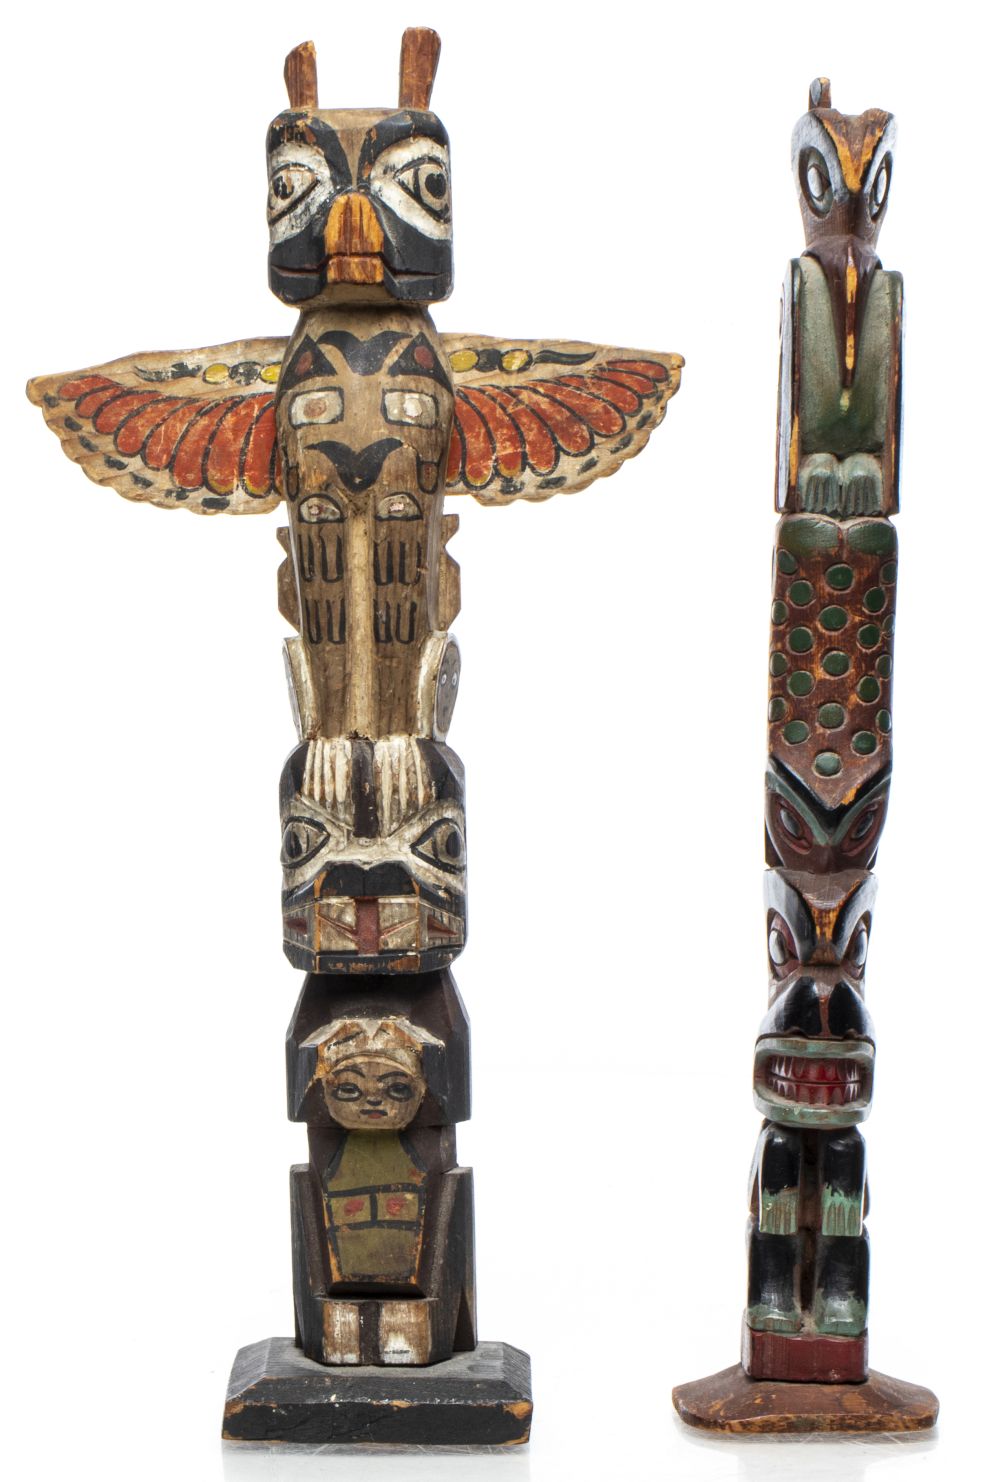 PACIFIC NORTHWEST CARVED WOOD TOTEM 3c4e5a